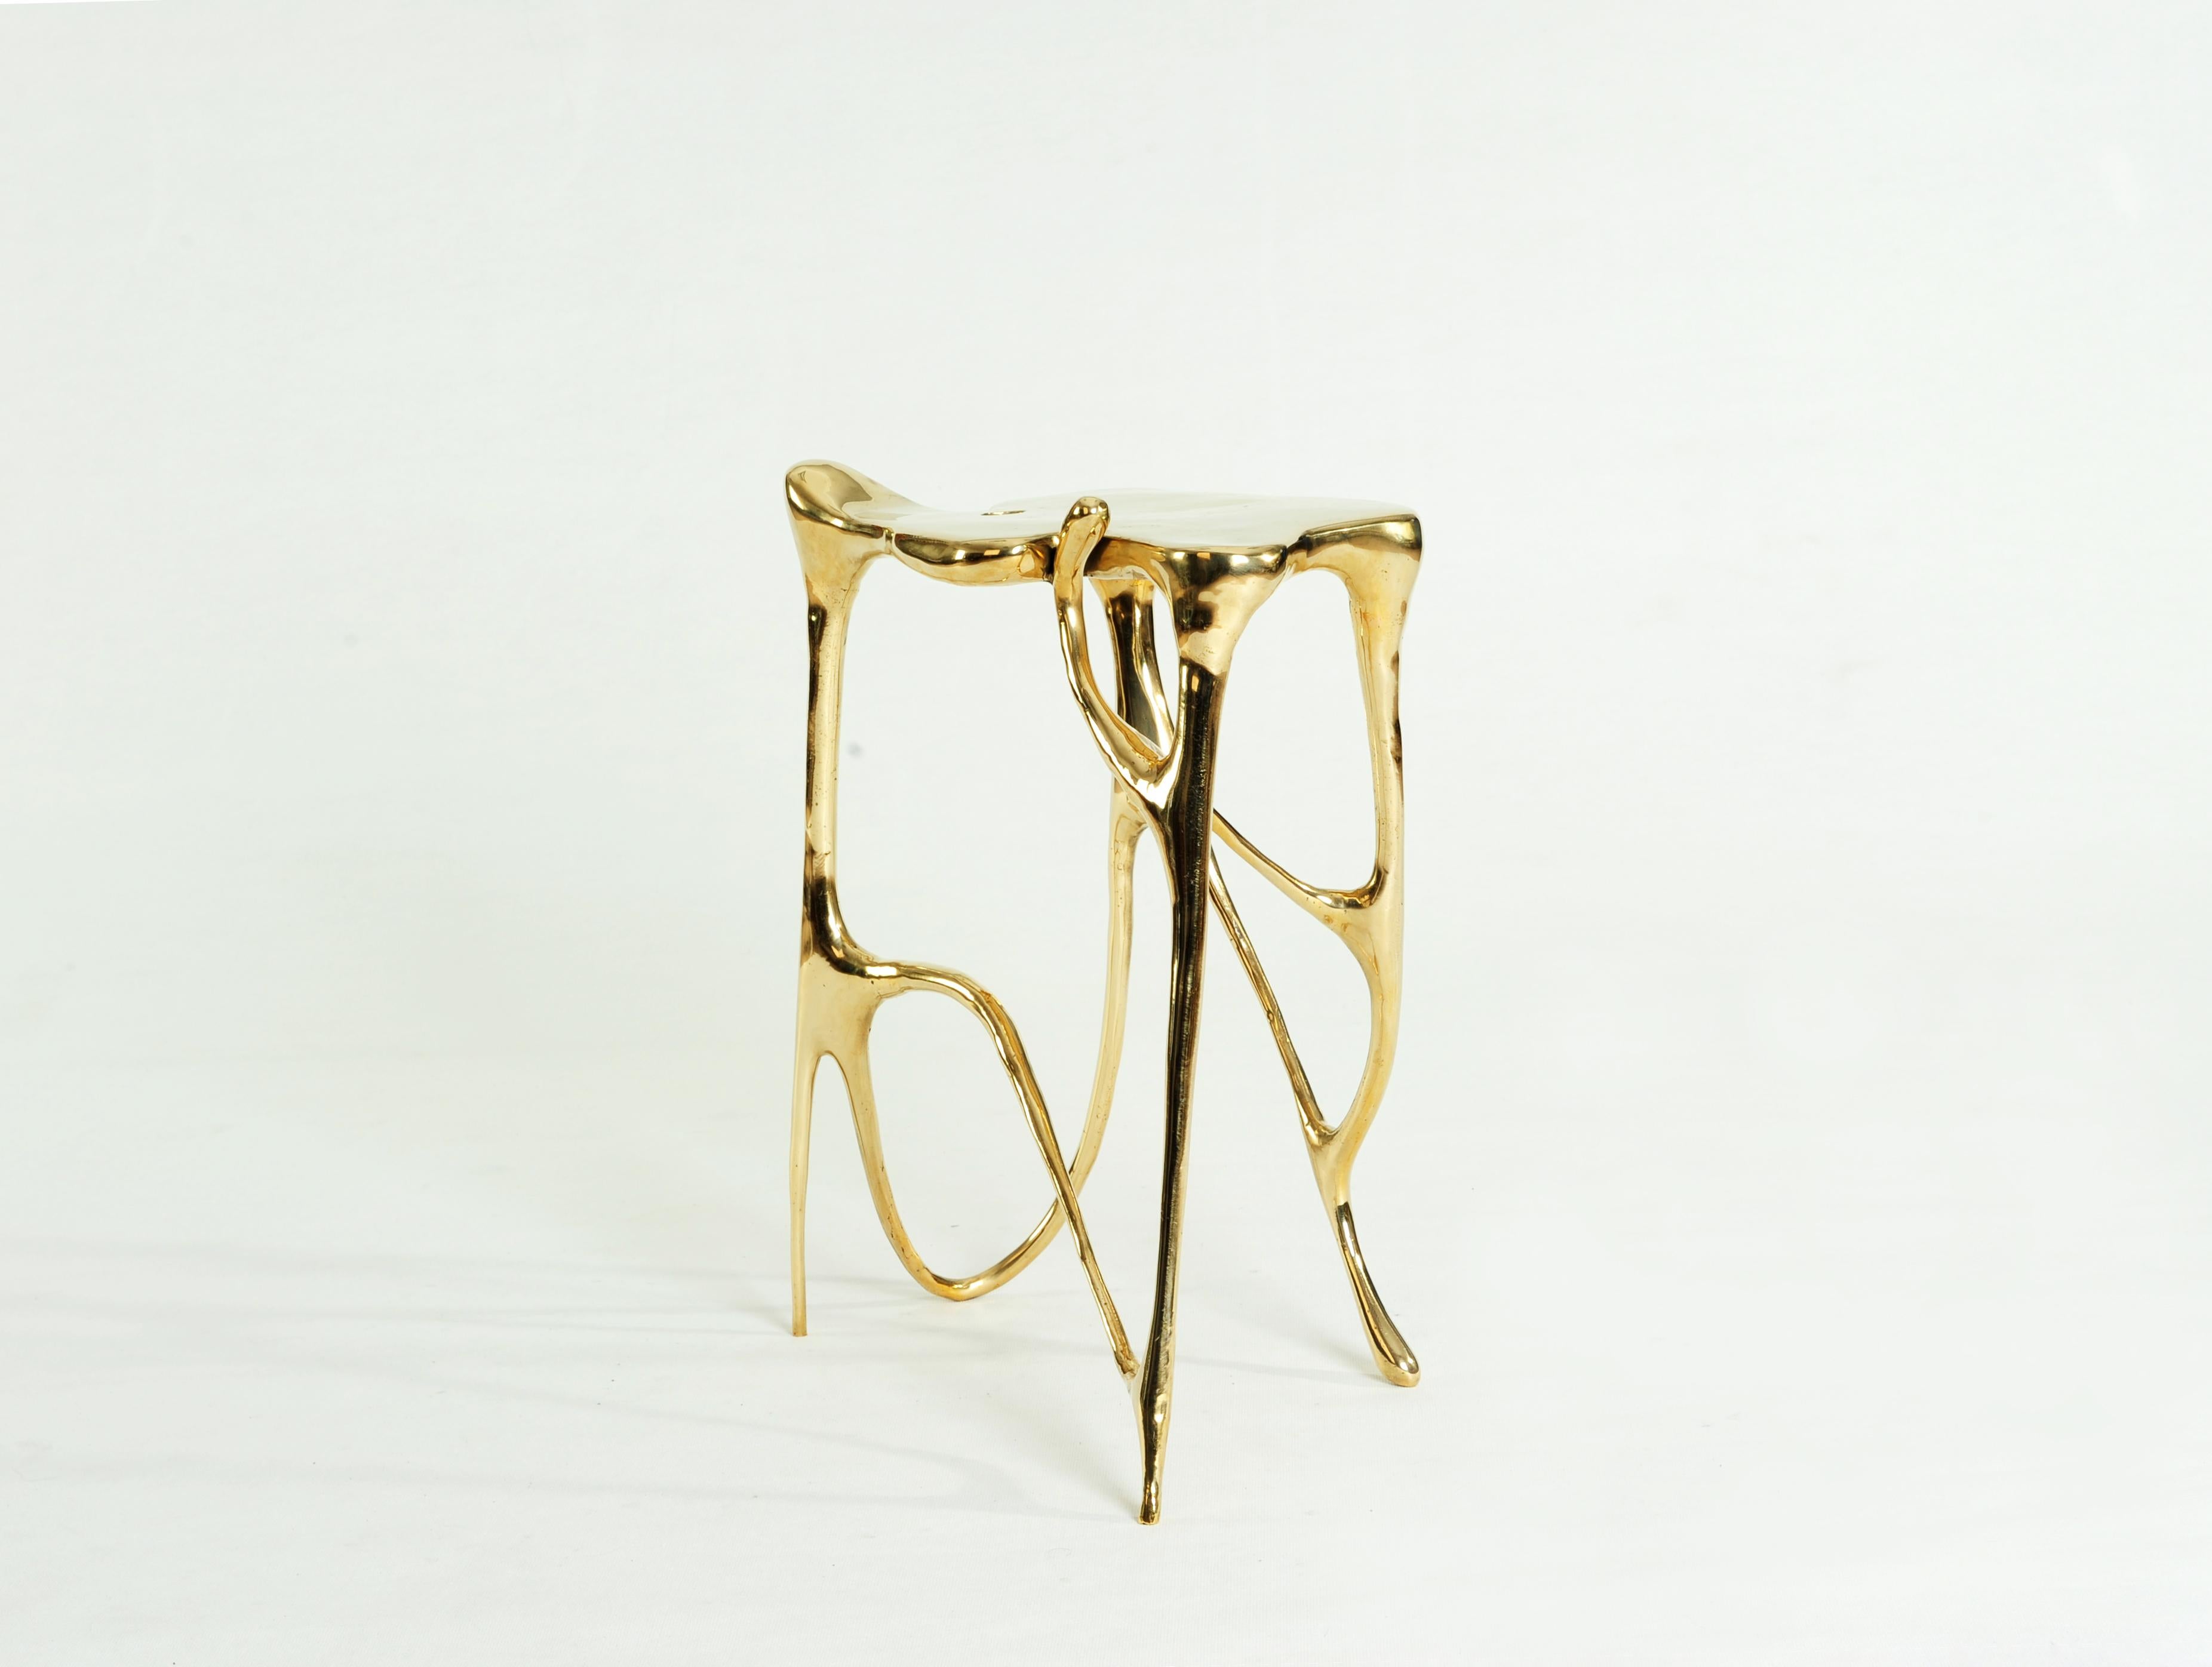 Thai Calligraphic Sculpted Brass Side Table by Misaya For Sale